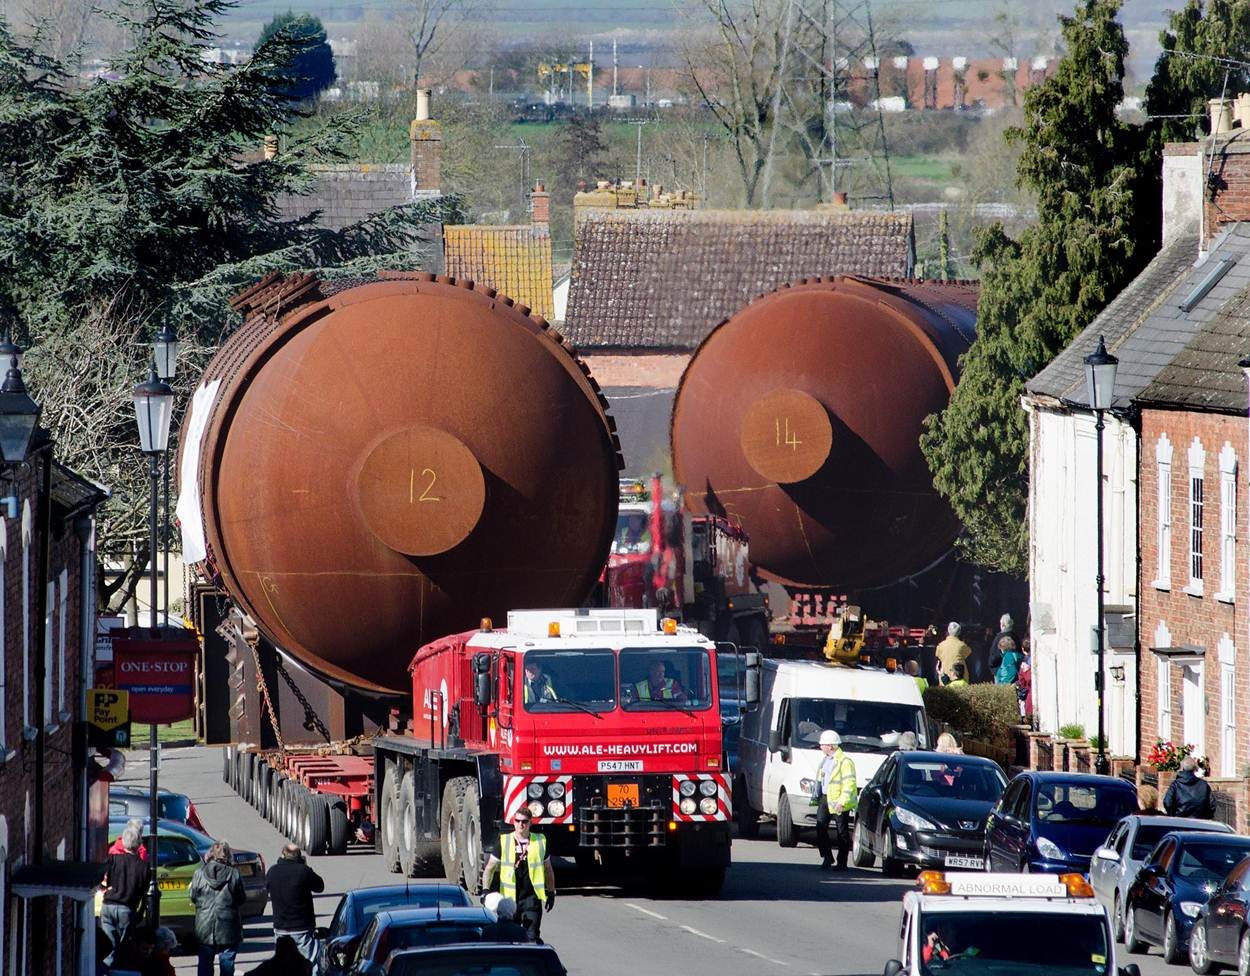 Two of the boilers being transported through the town of Berkeley